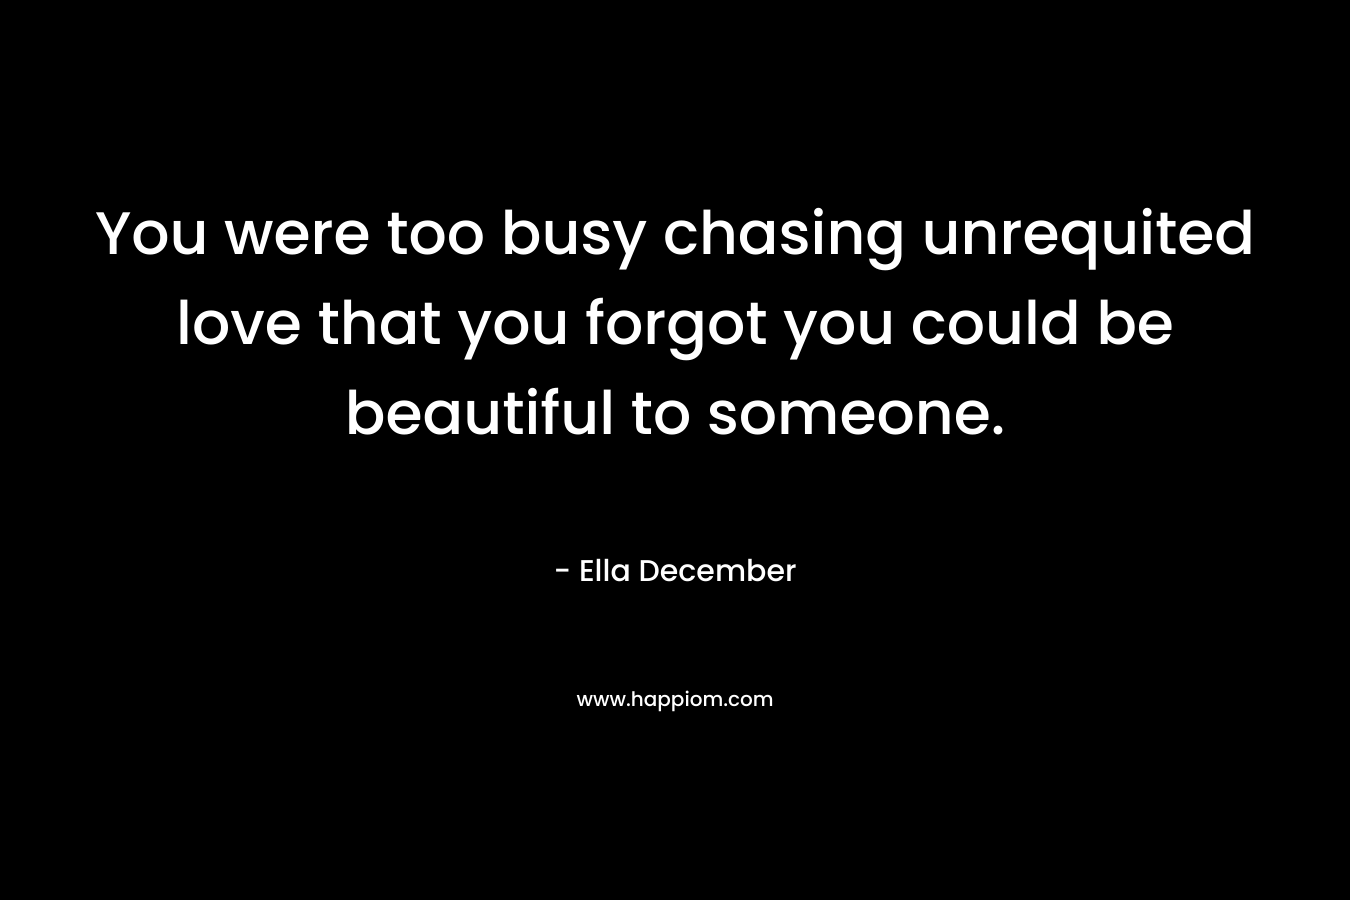 You were too busy chasing unrequited love that you forgot you could be beautiful to someone. – Ella December